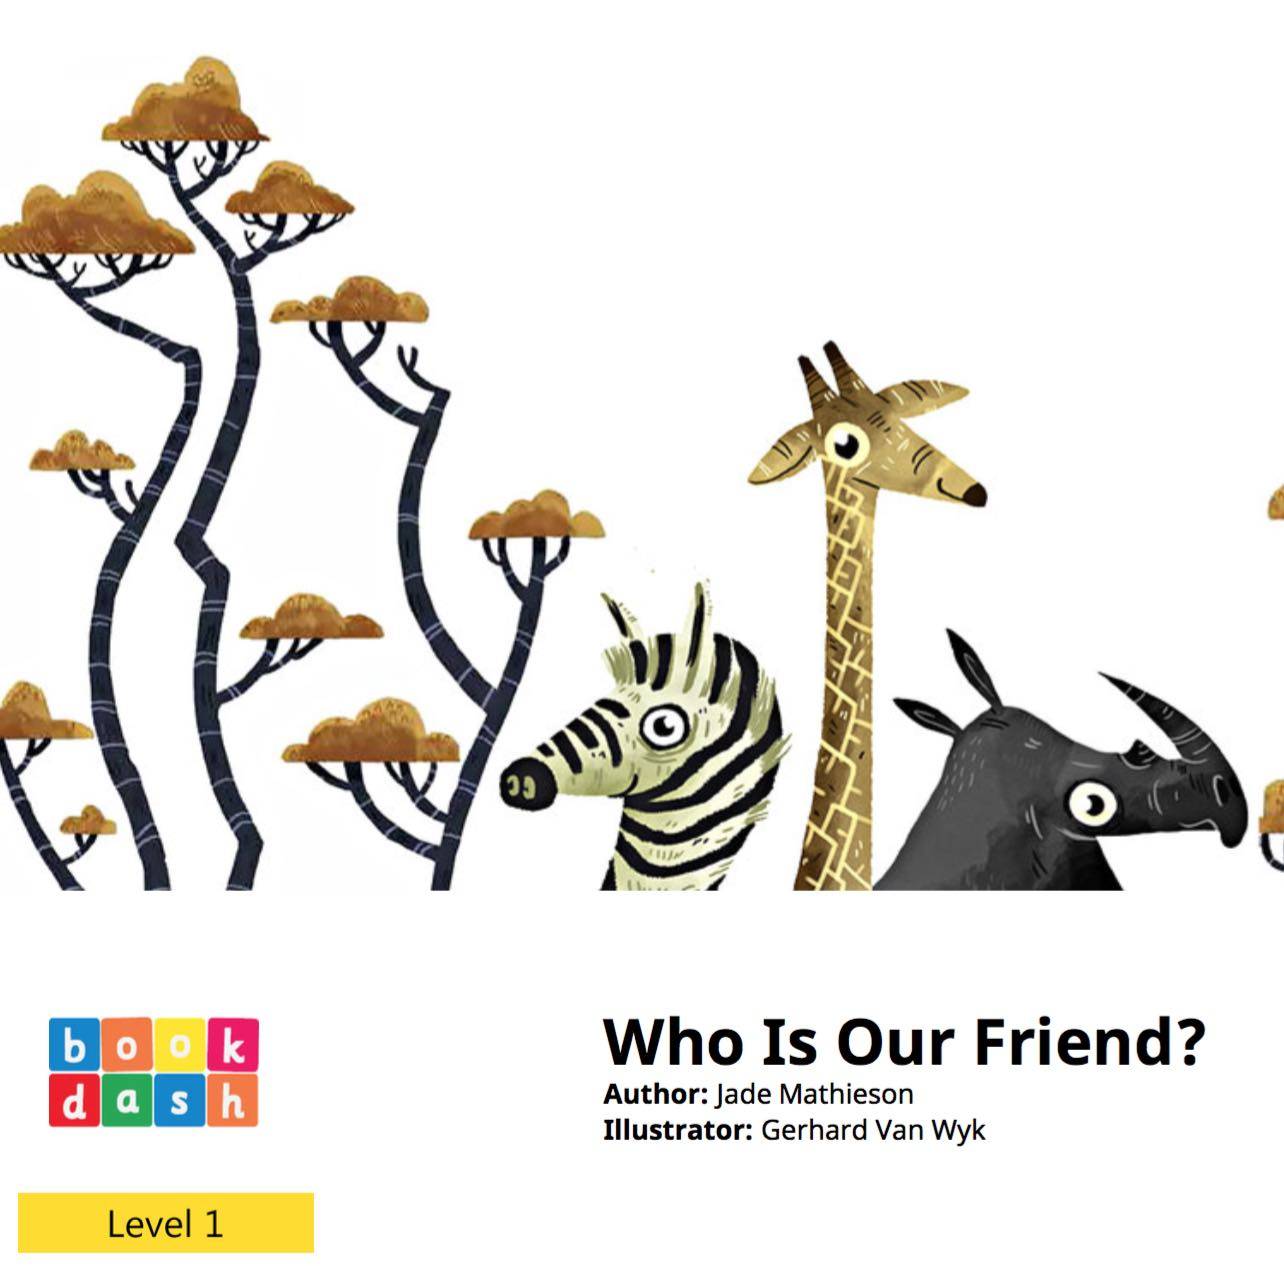 who is our friend nature book for young children